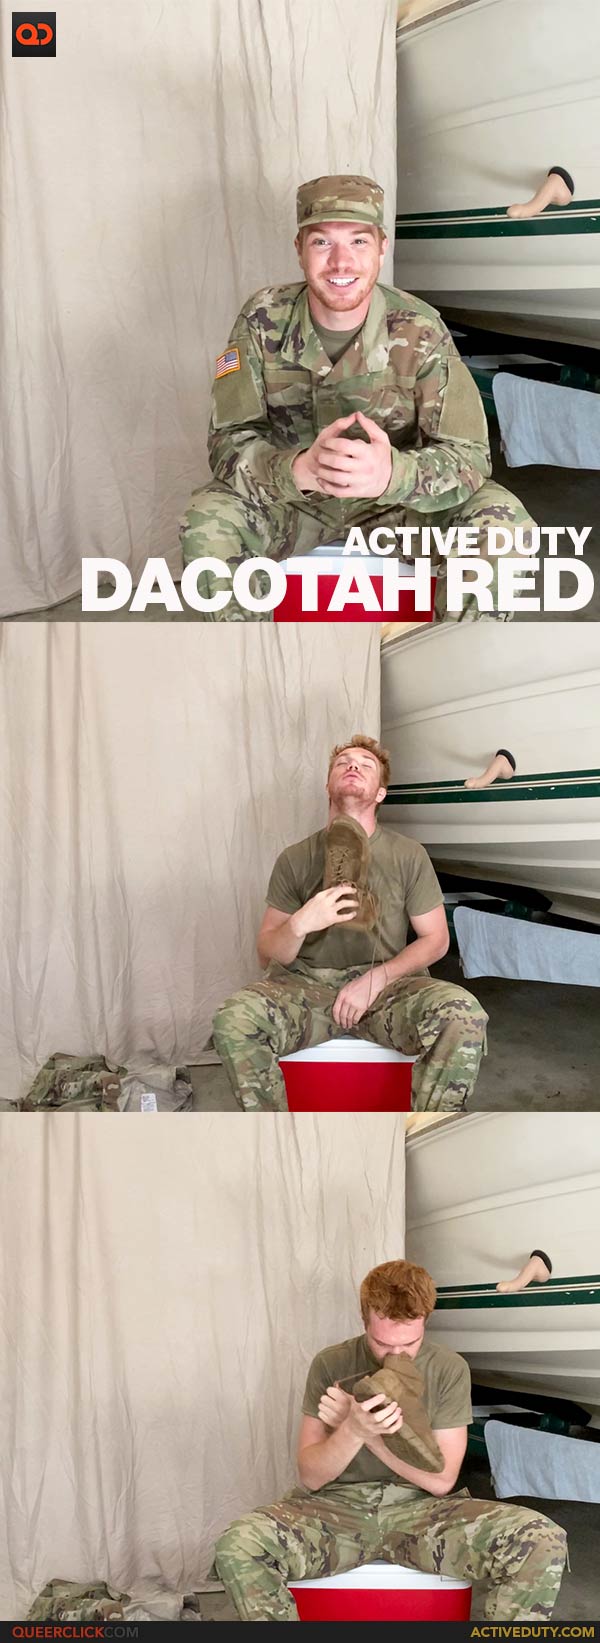 Active Duty: Dacotah Red - At Ease